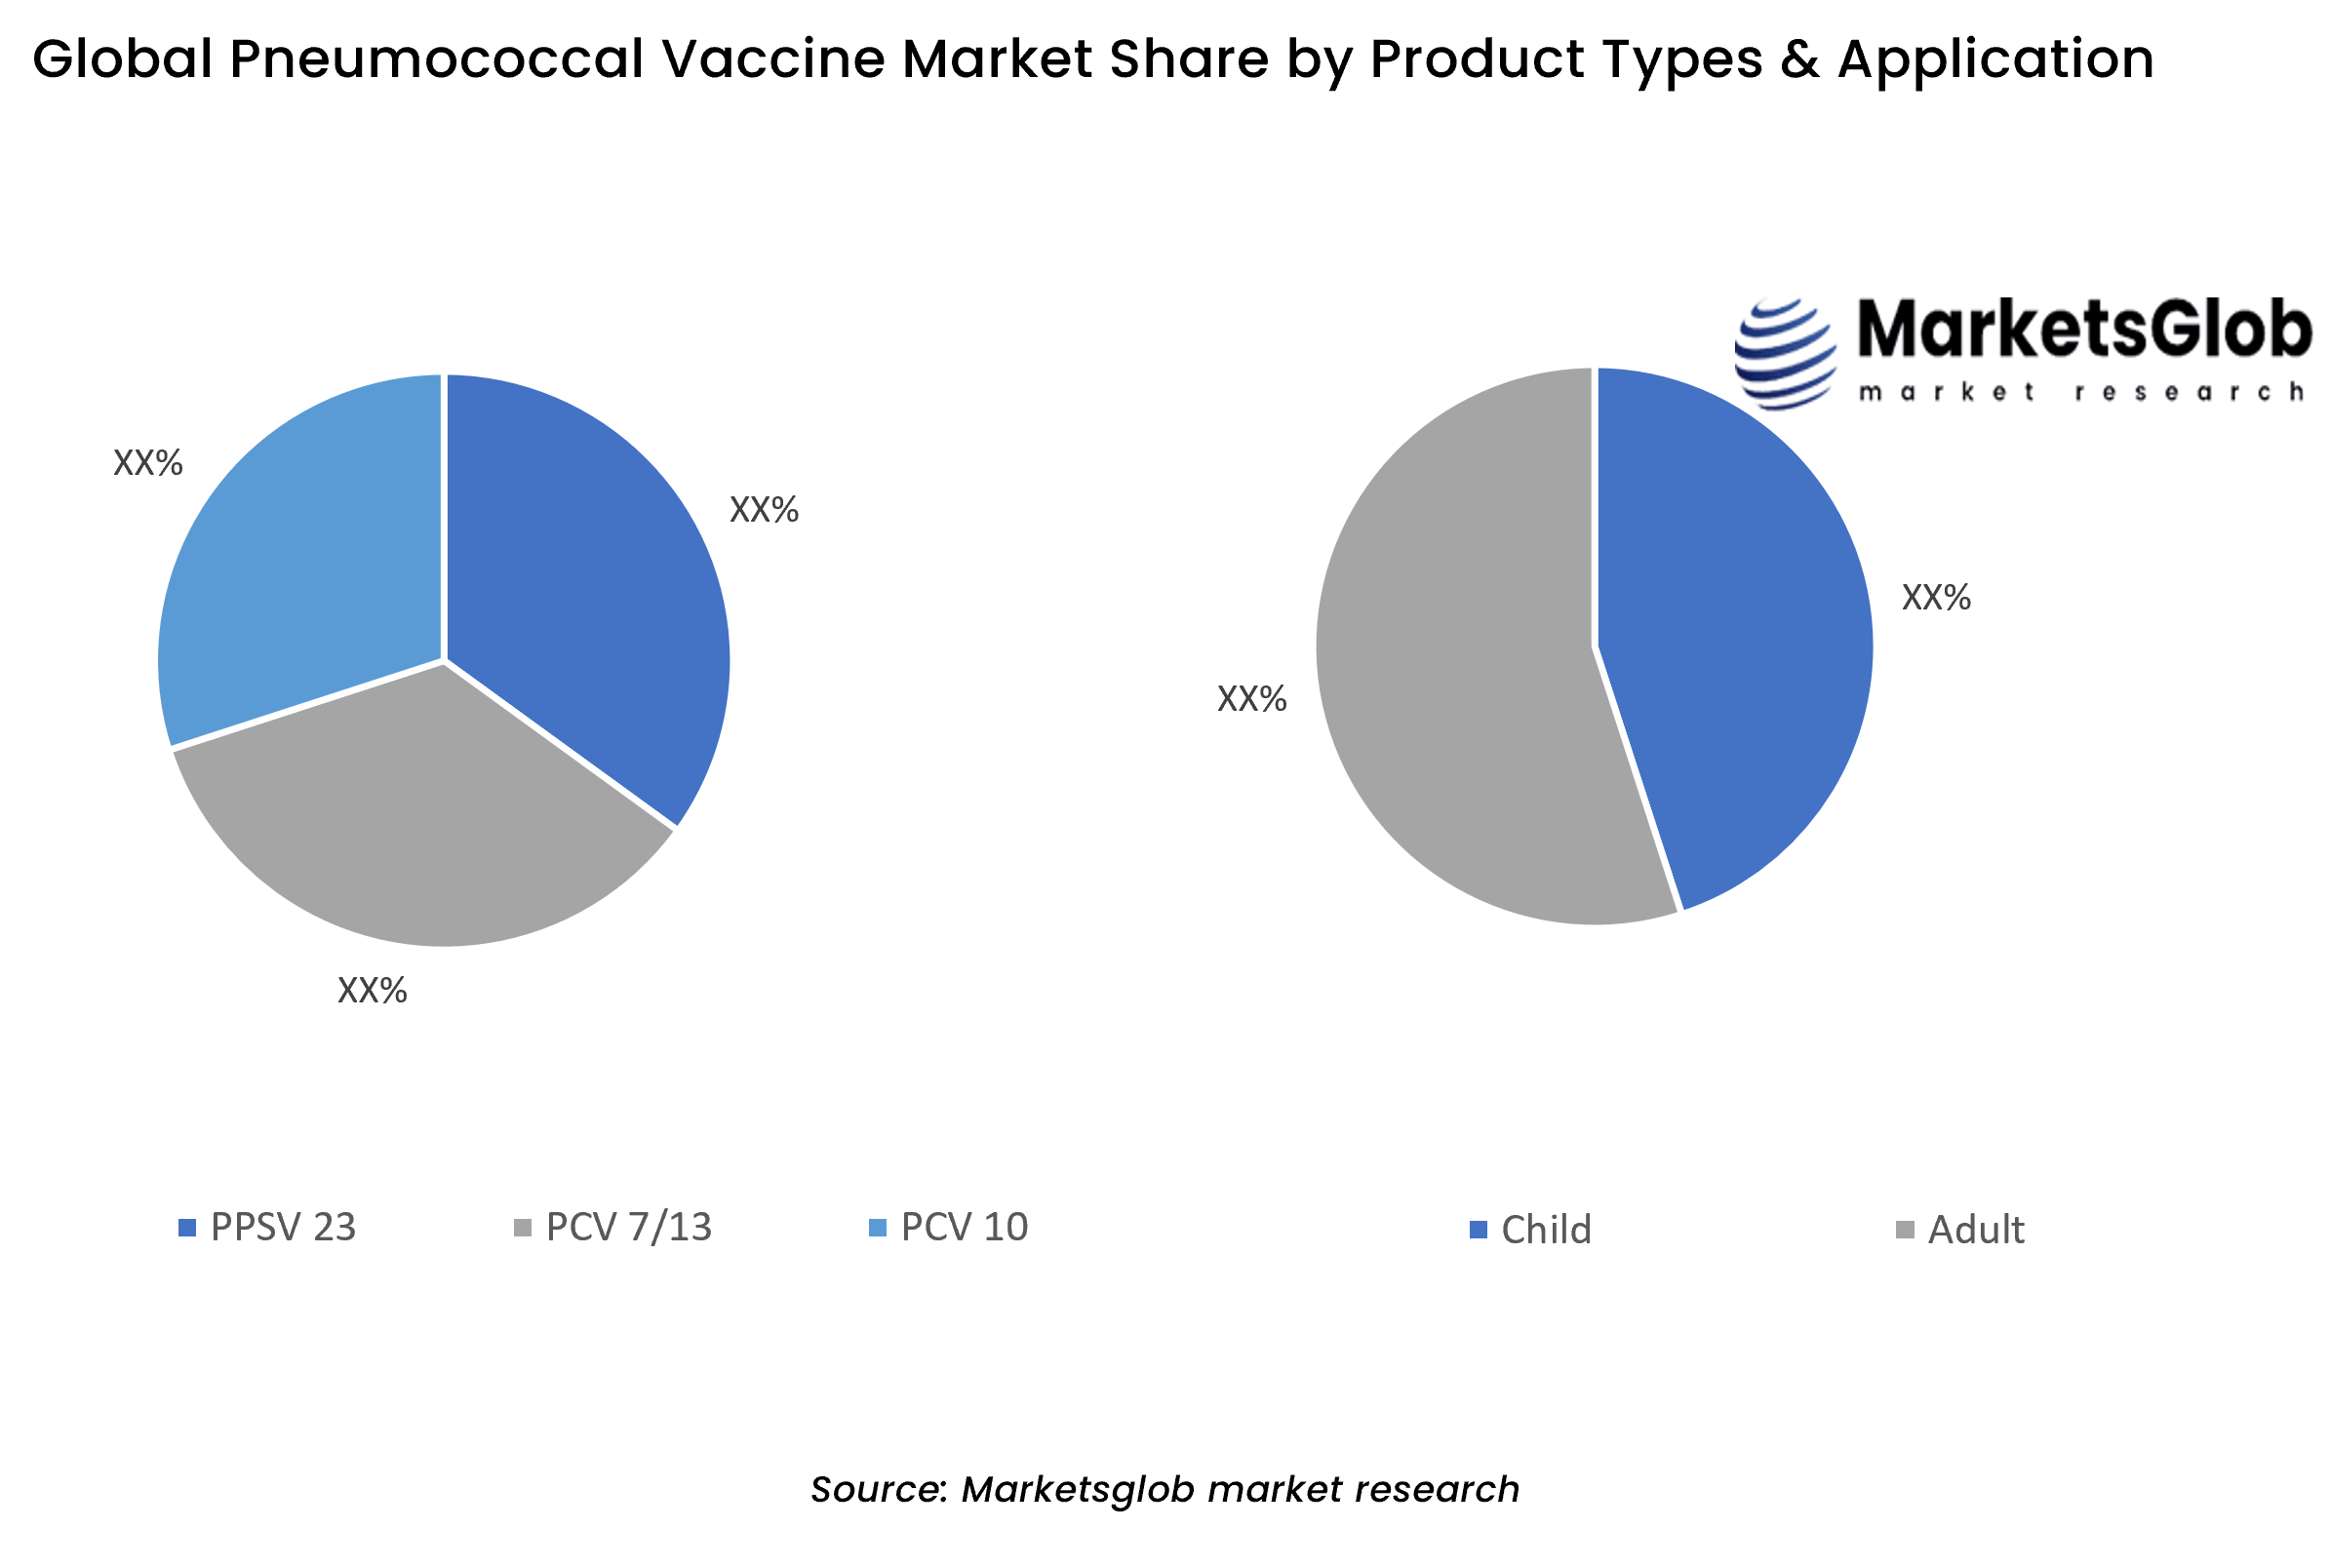 Pneumococcal Vaccine Share by Product Types & Application